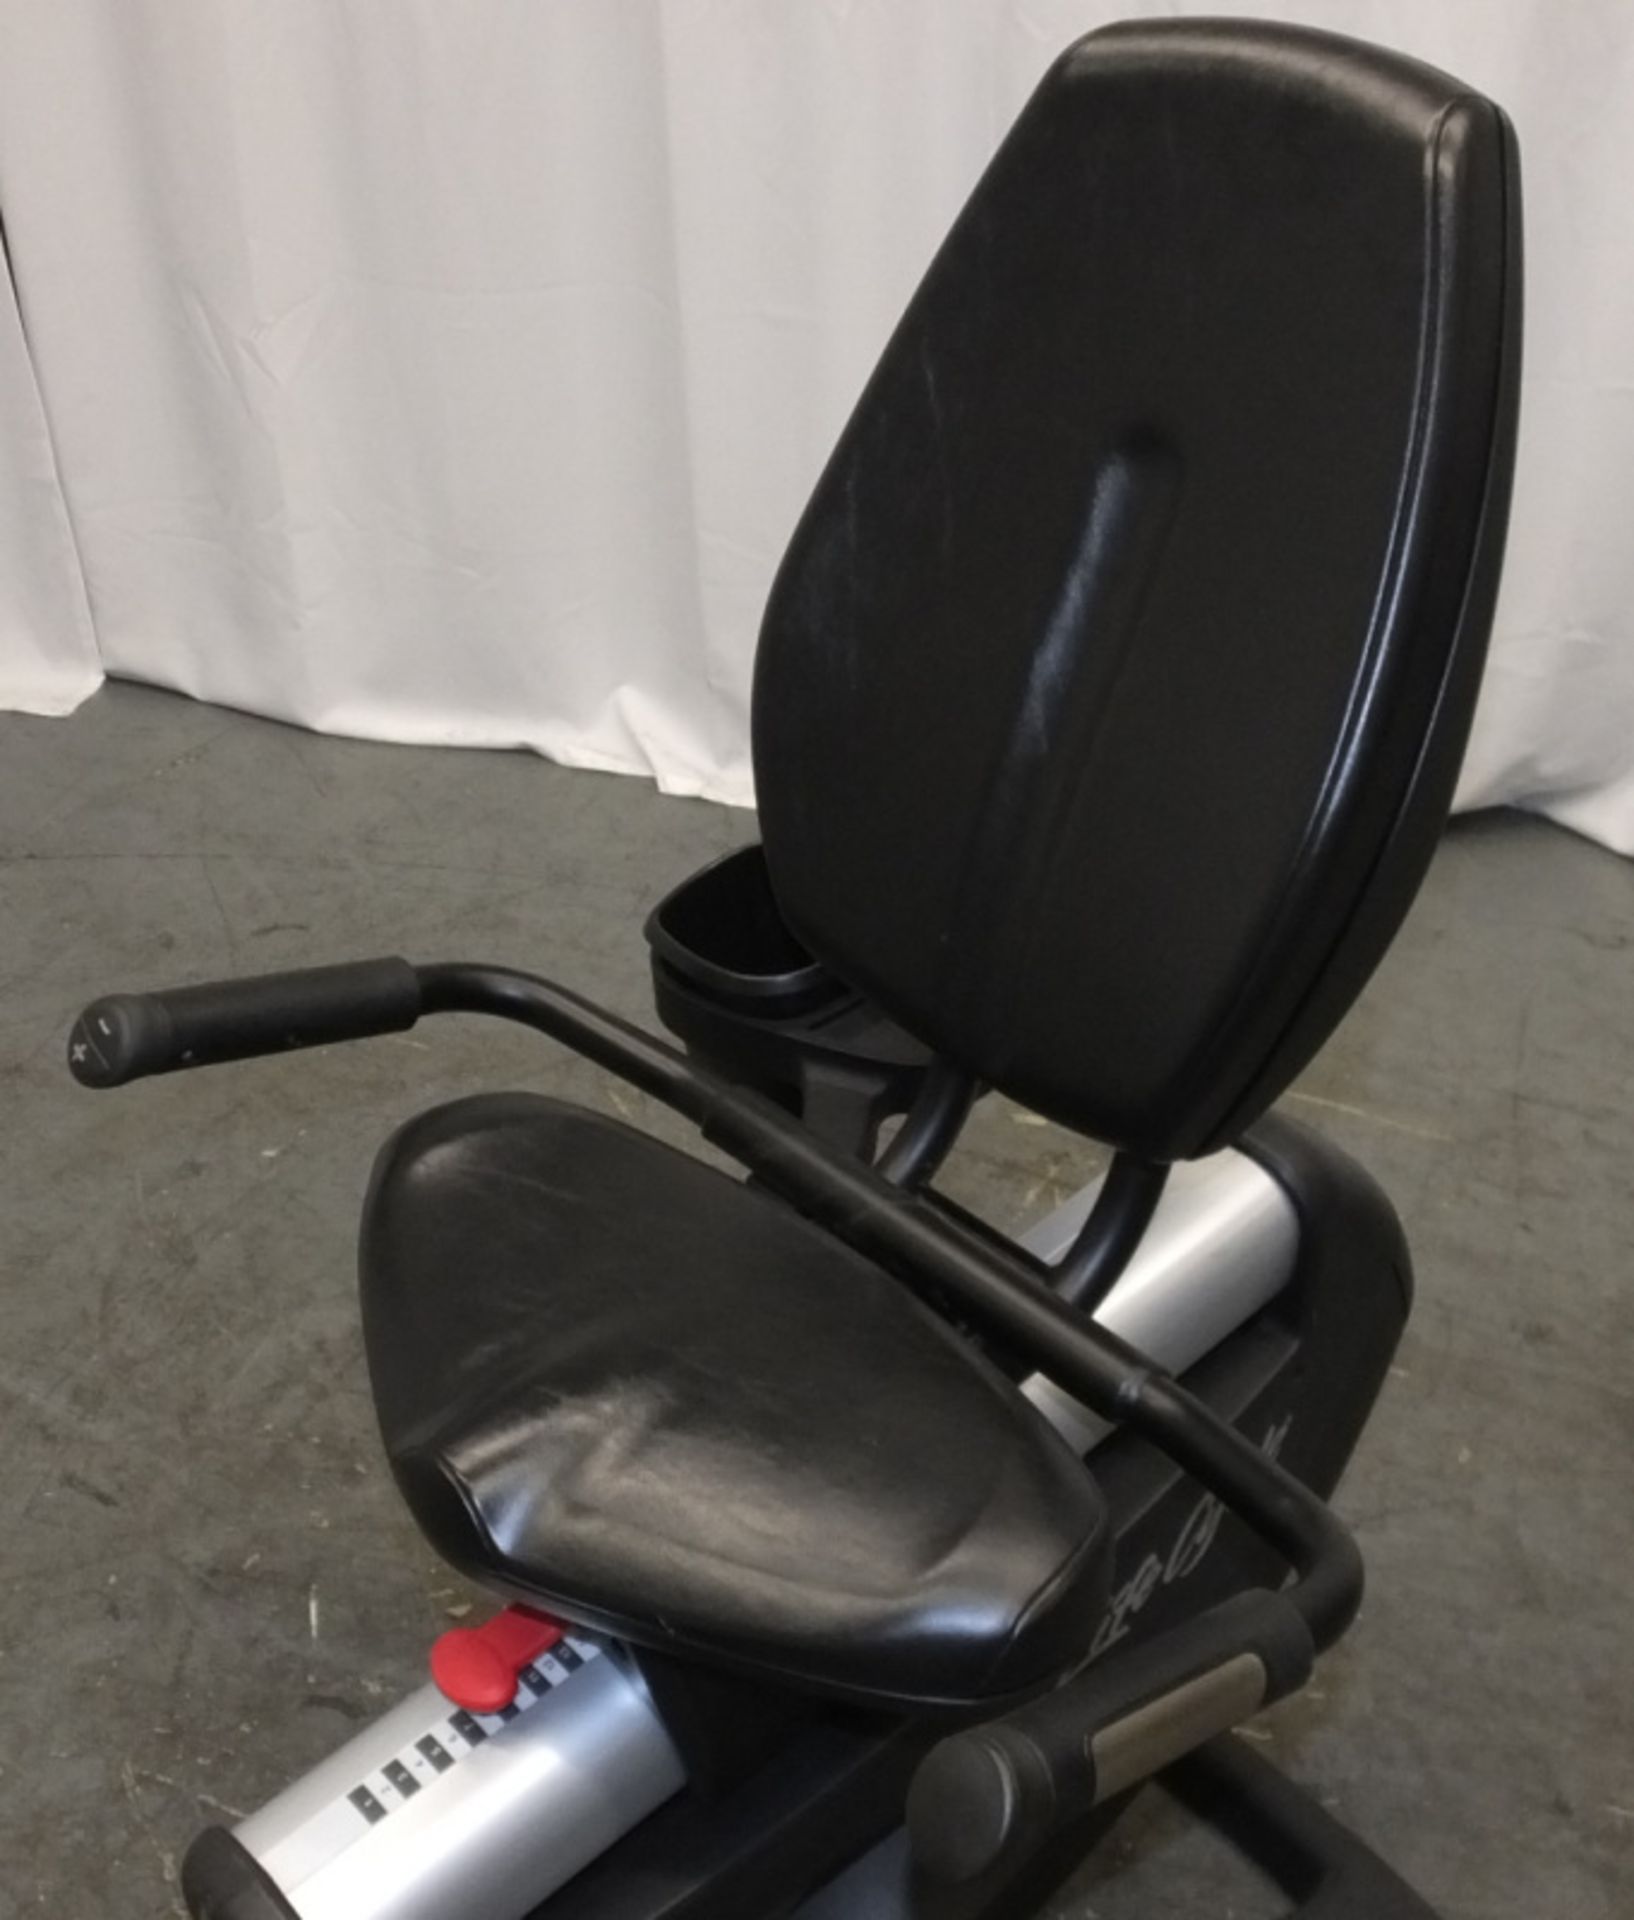 Life Fitness Life Cycle 95RS Recumbent Exercise Bike - Missing Power Pack - Image 4 of 9